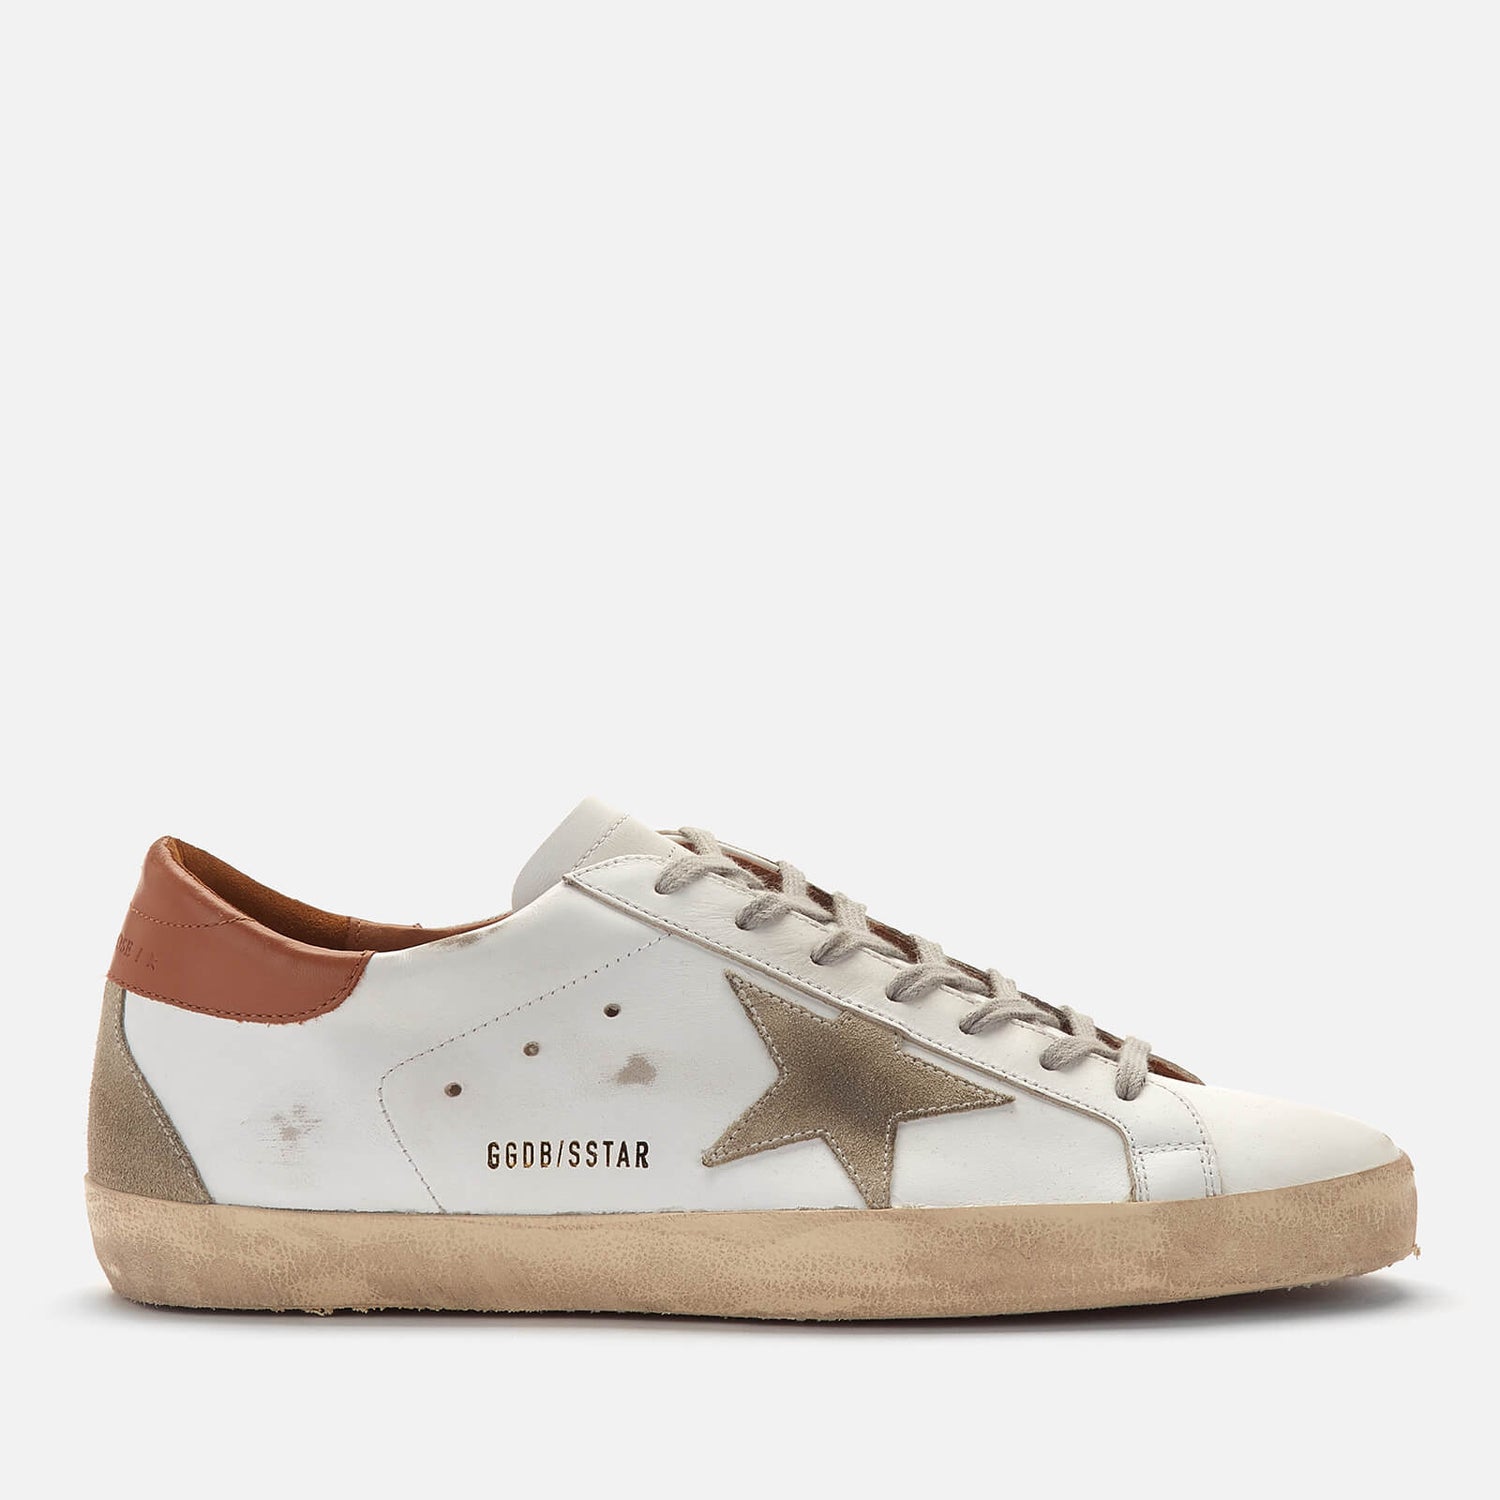 Golden Goose Men's Superstar Leather Trainers - White/Ice/Light Brown - UK 10